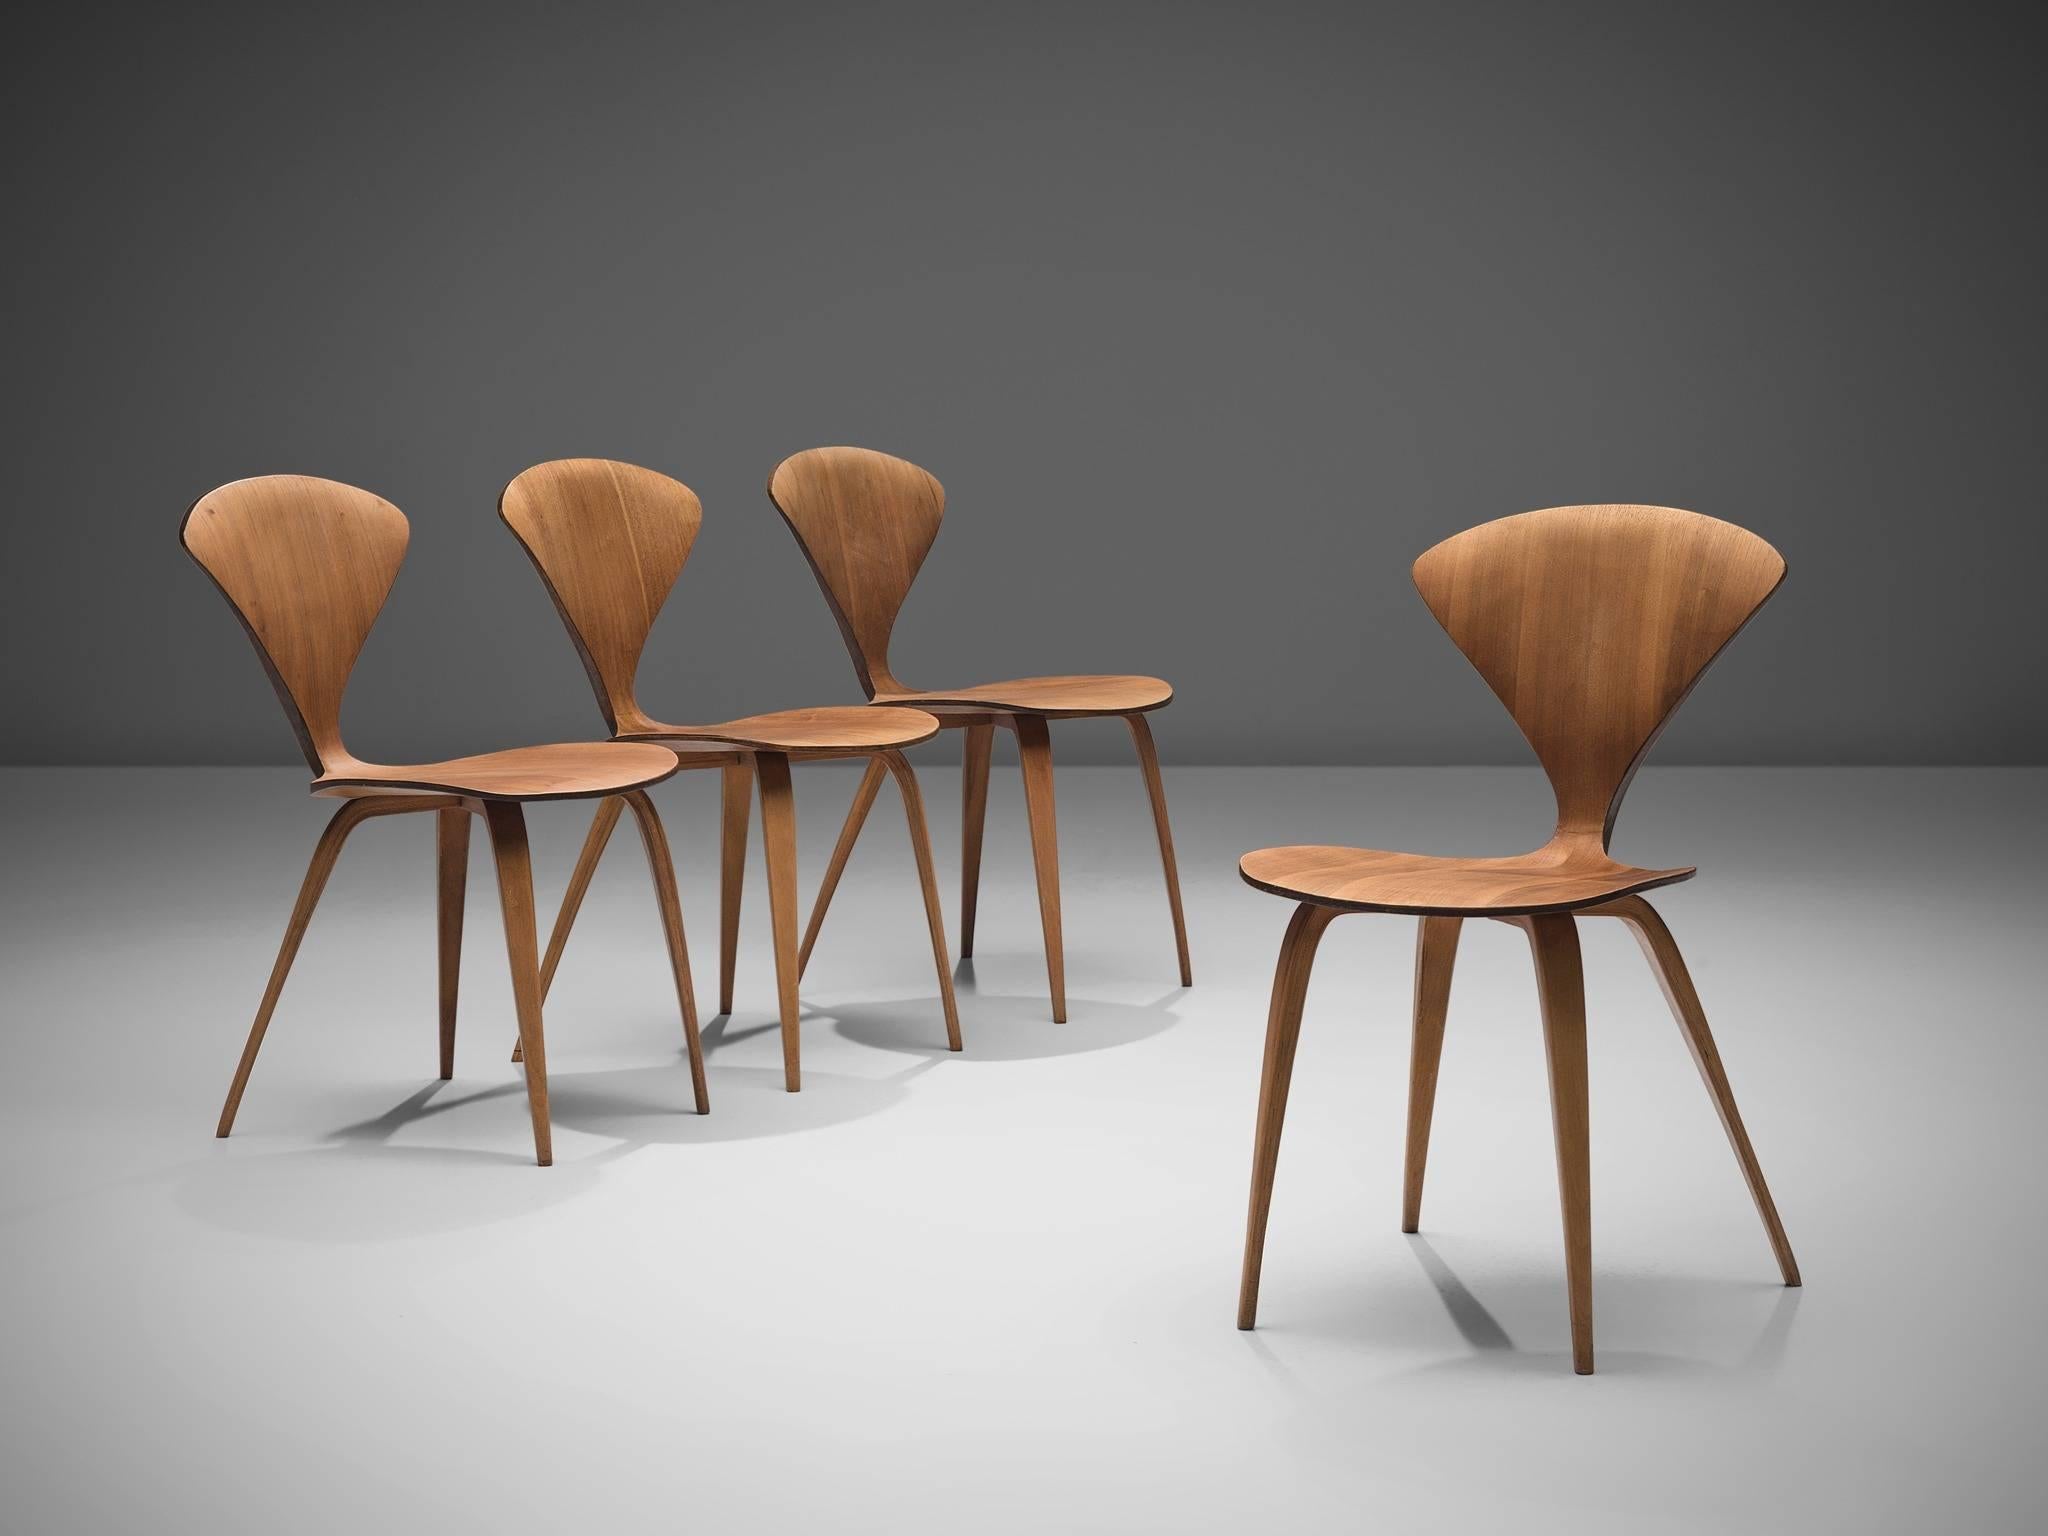 Norman Cherner for Plycraft, set of four dining chairs, walnut and plywood, United States 1957.

These four Classic Norman Cherner plywood chairs date from 1957. Their iconic shape resembles something like a delicate butterfly, yet do not be